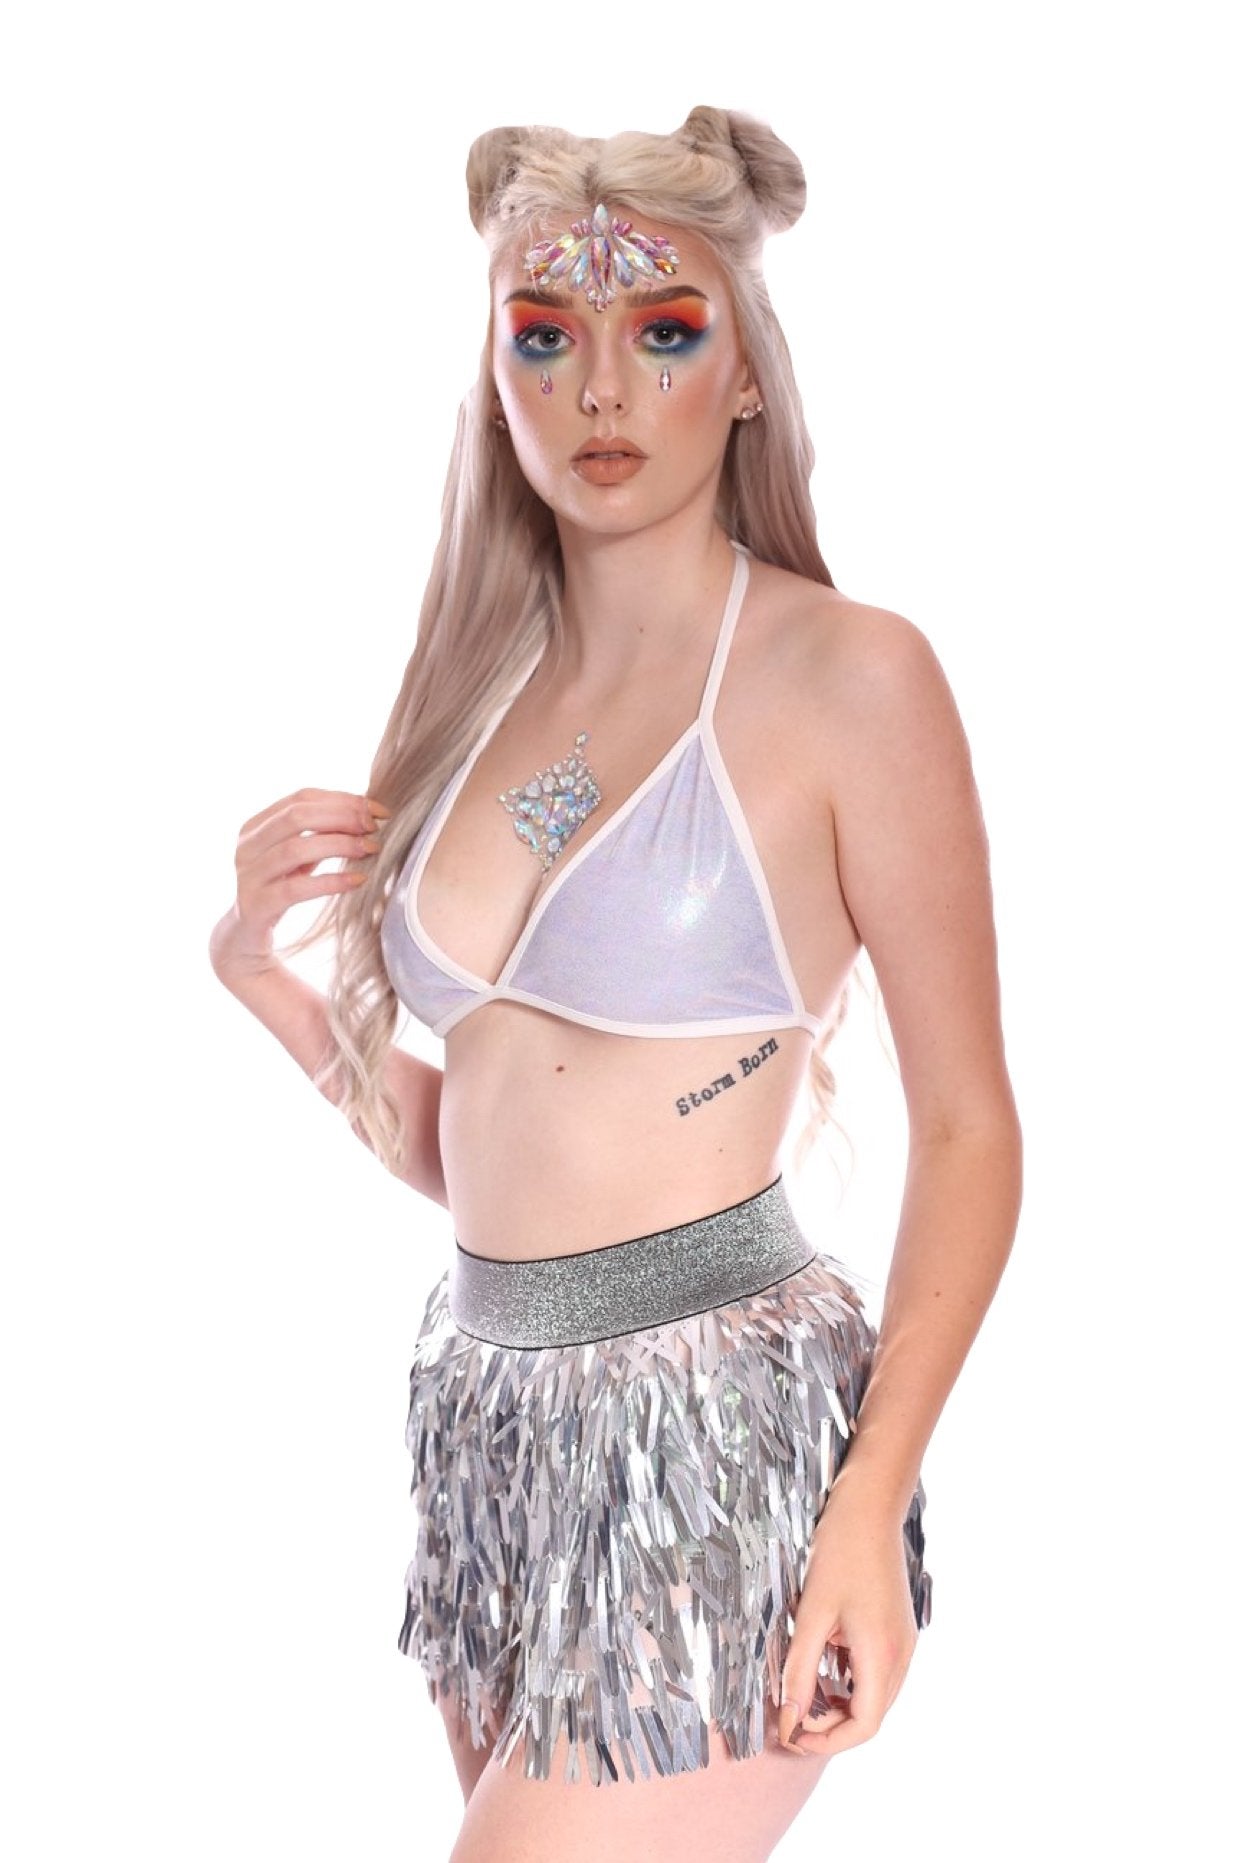 Outer Space Mini Sequin Skirt - Silver